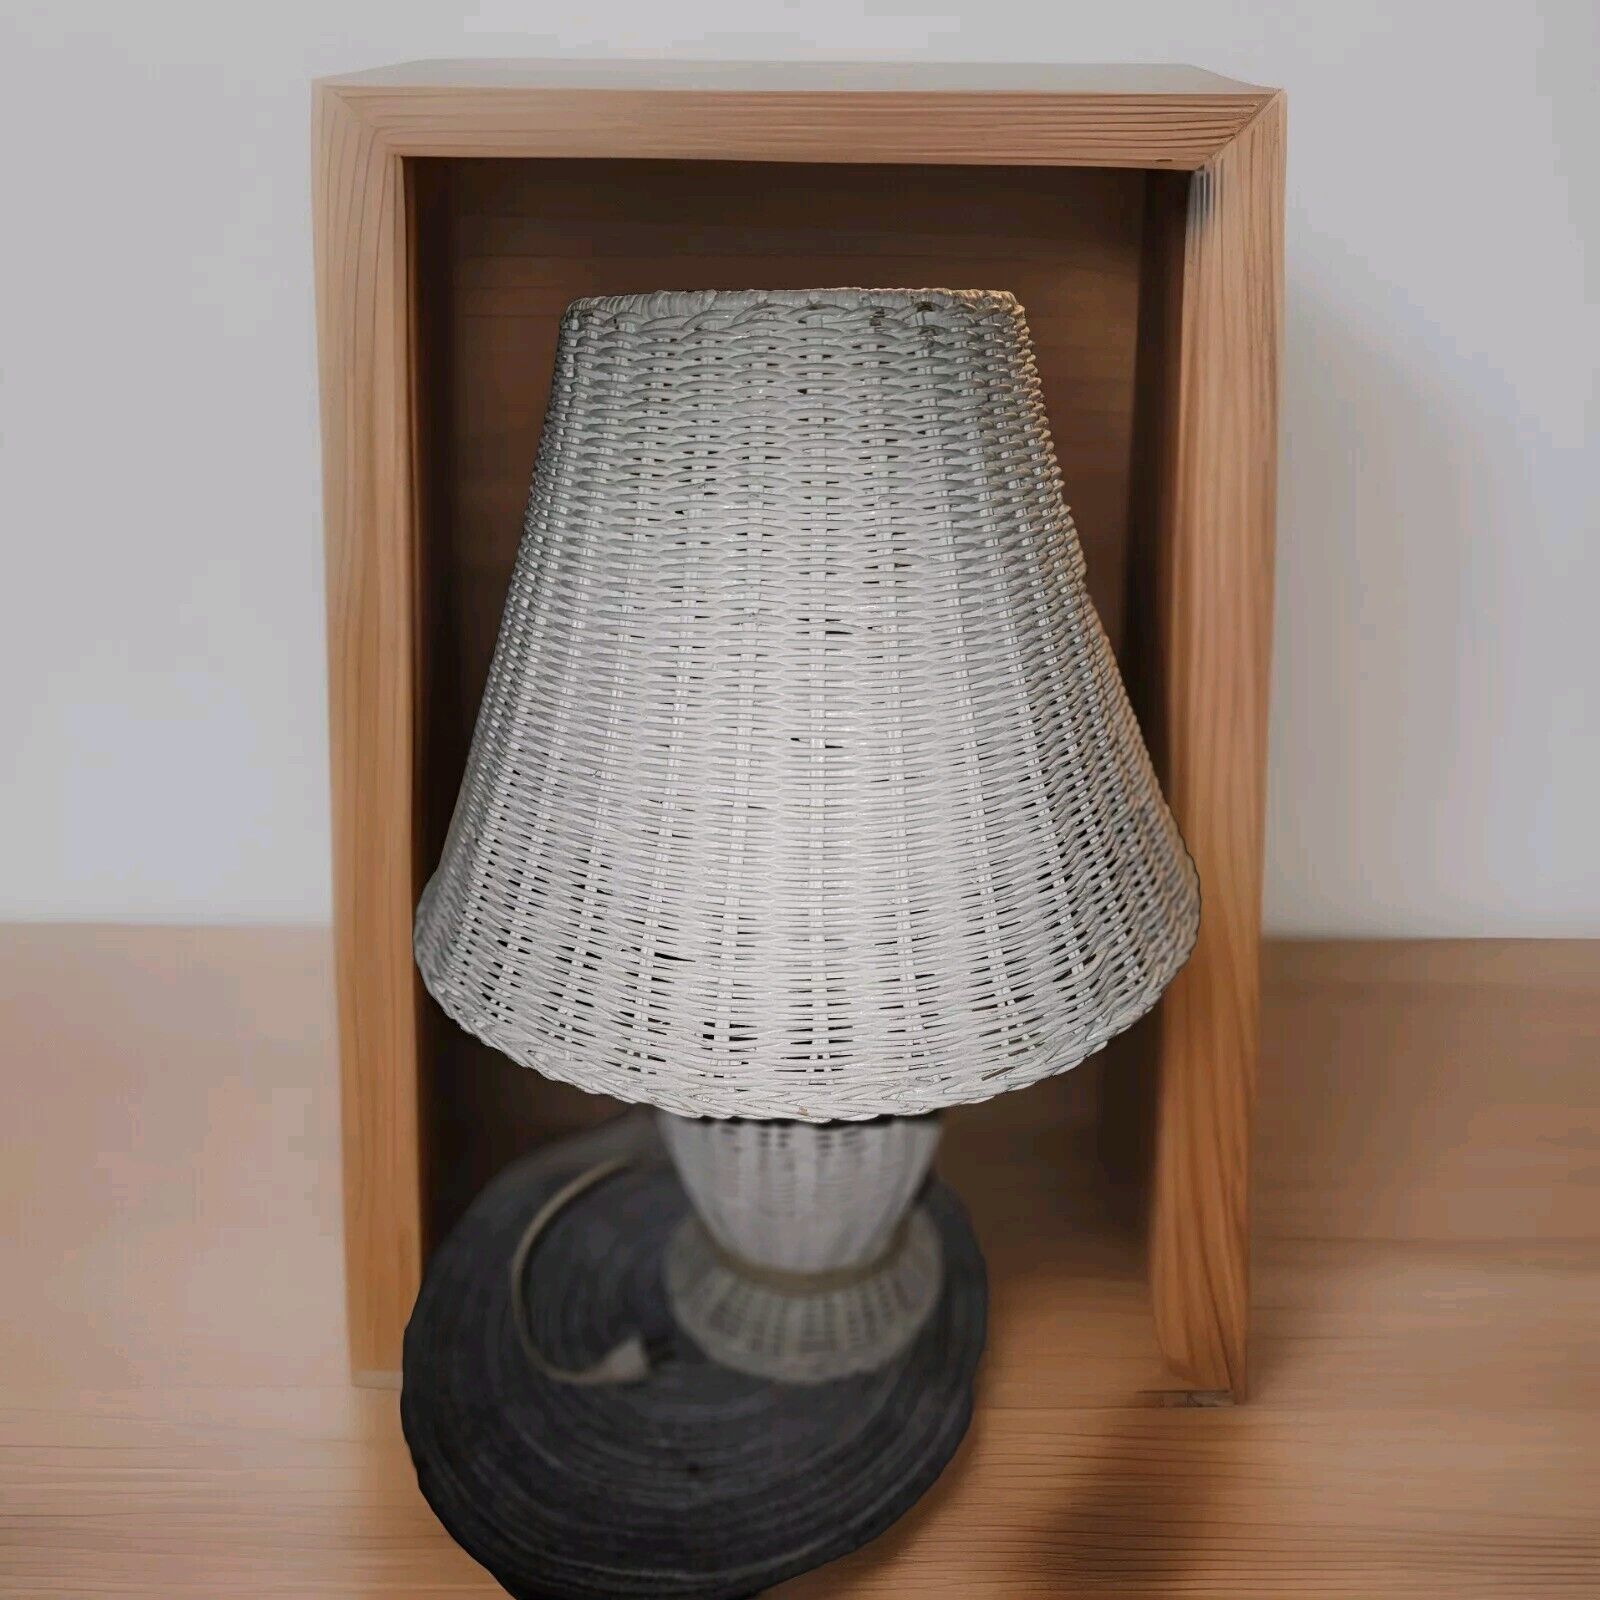 Vintage Wicker Rattan Table Lamp With Matching Shade White